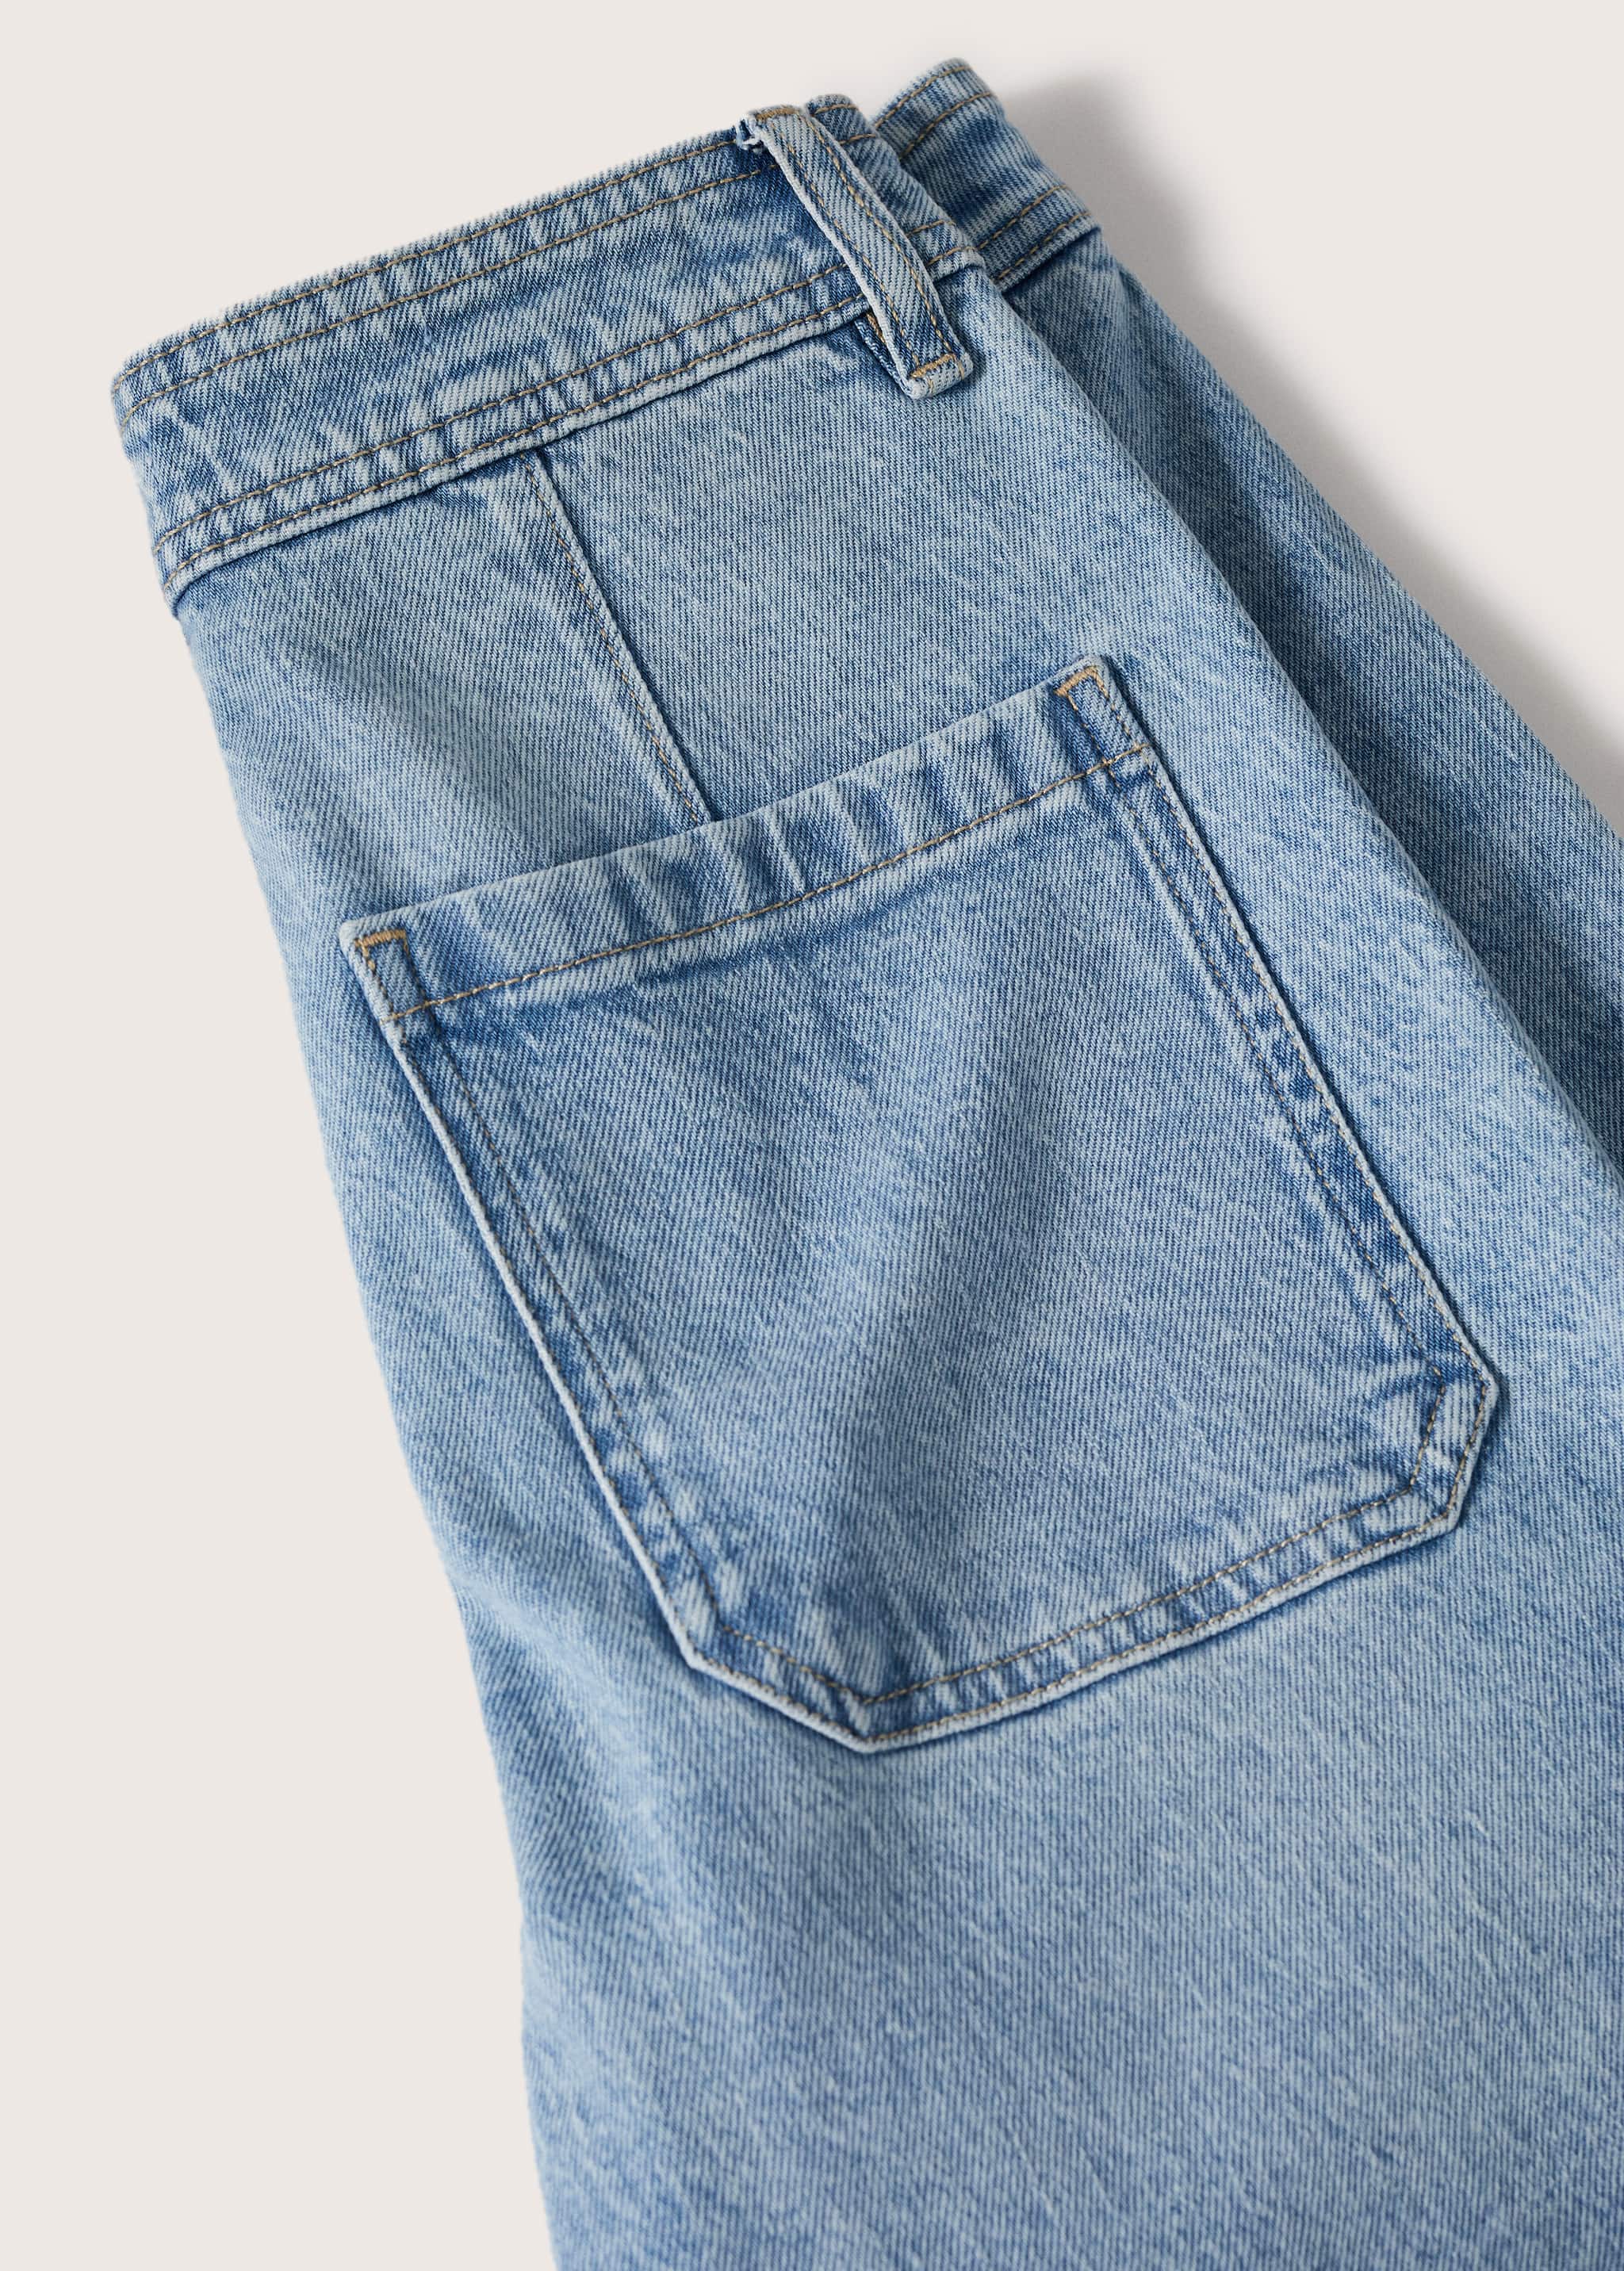 Jeans culotte high waist - Details of the article 8